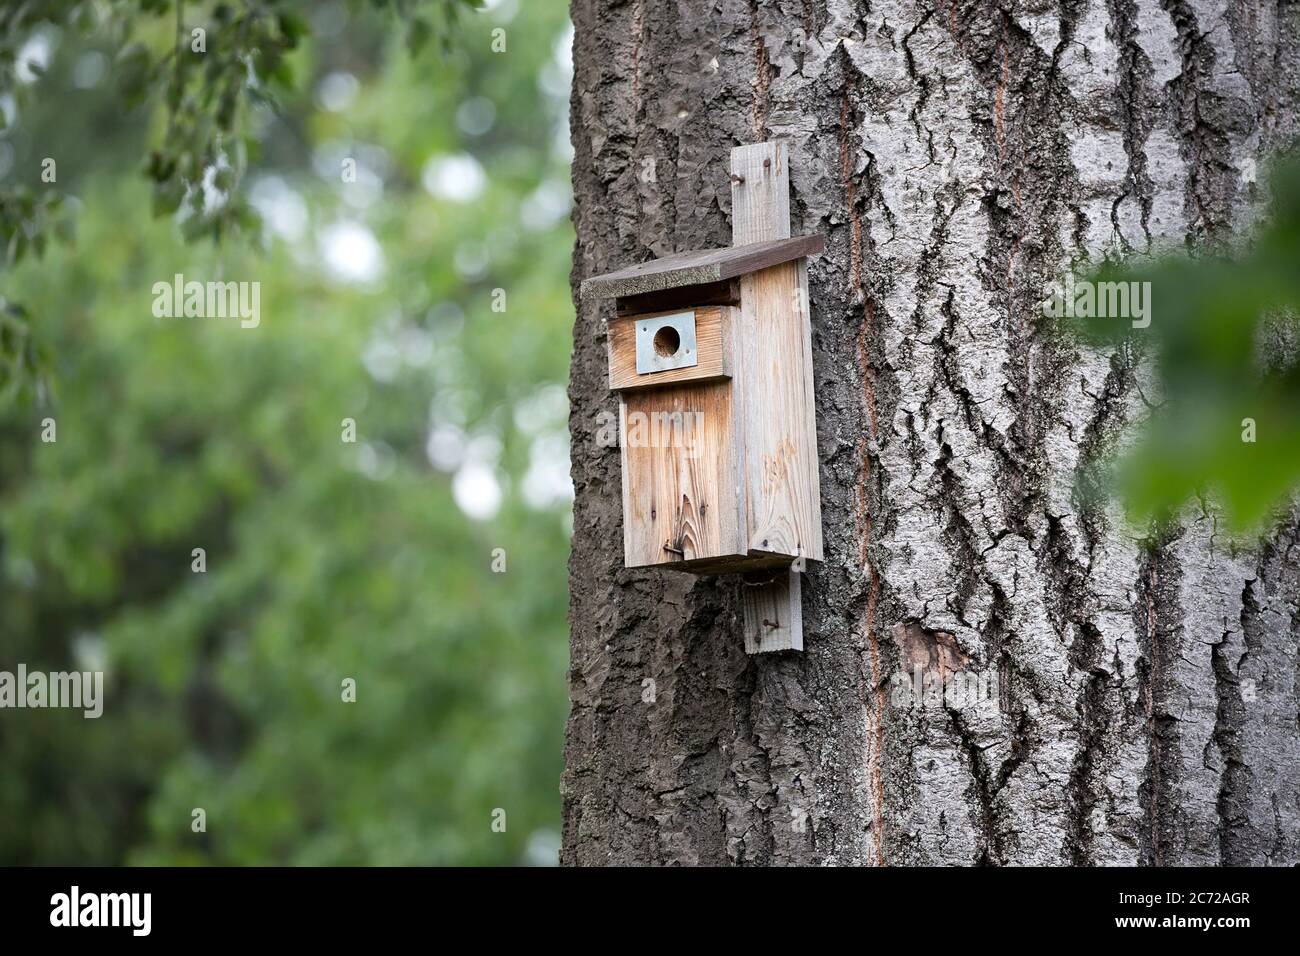 Nest box for a birds in the forest Stock Photo